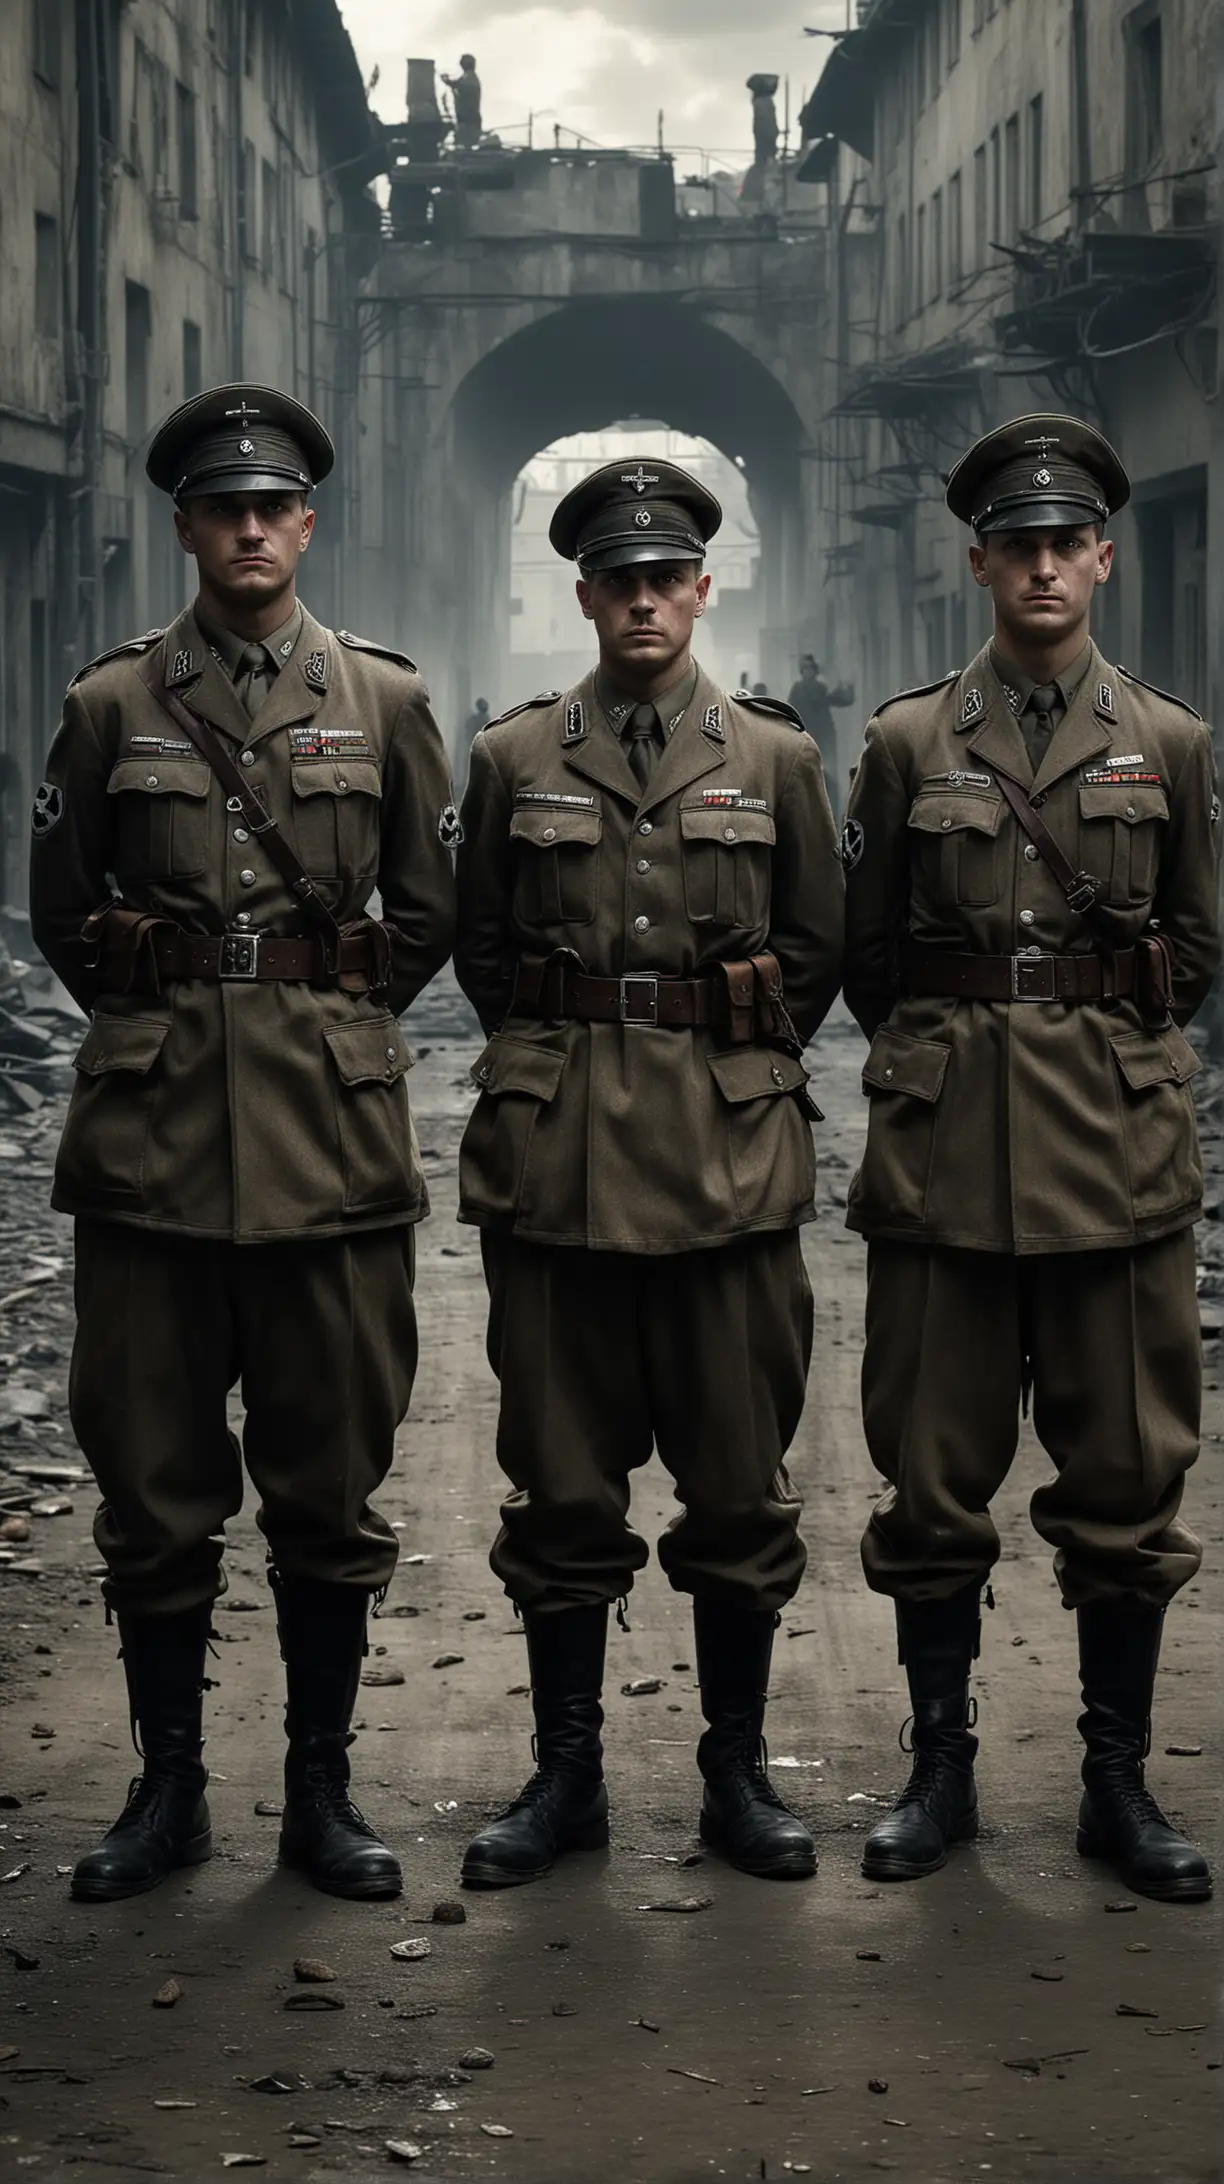 Create an image of three Nazi German soldiers standing in a menacing pose for a video cover. The soldiers should be dressed in authentic World War II German military uniforms, complete with helmets, insignias, and weapons (such as rifles or submachine guns). They should be positioned against a dark, ominous background, possibly with elements like barbed wire, a ruined cityscape, or an imposing military structure in the background. The overall mood of the image should be intense and foreboding, capturing the authoritarian and oppressive nature of the Nazi regime. The lighting should be dramatic, with stark contrasts and shadows to enhance the sense of menace and tension.